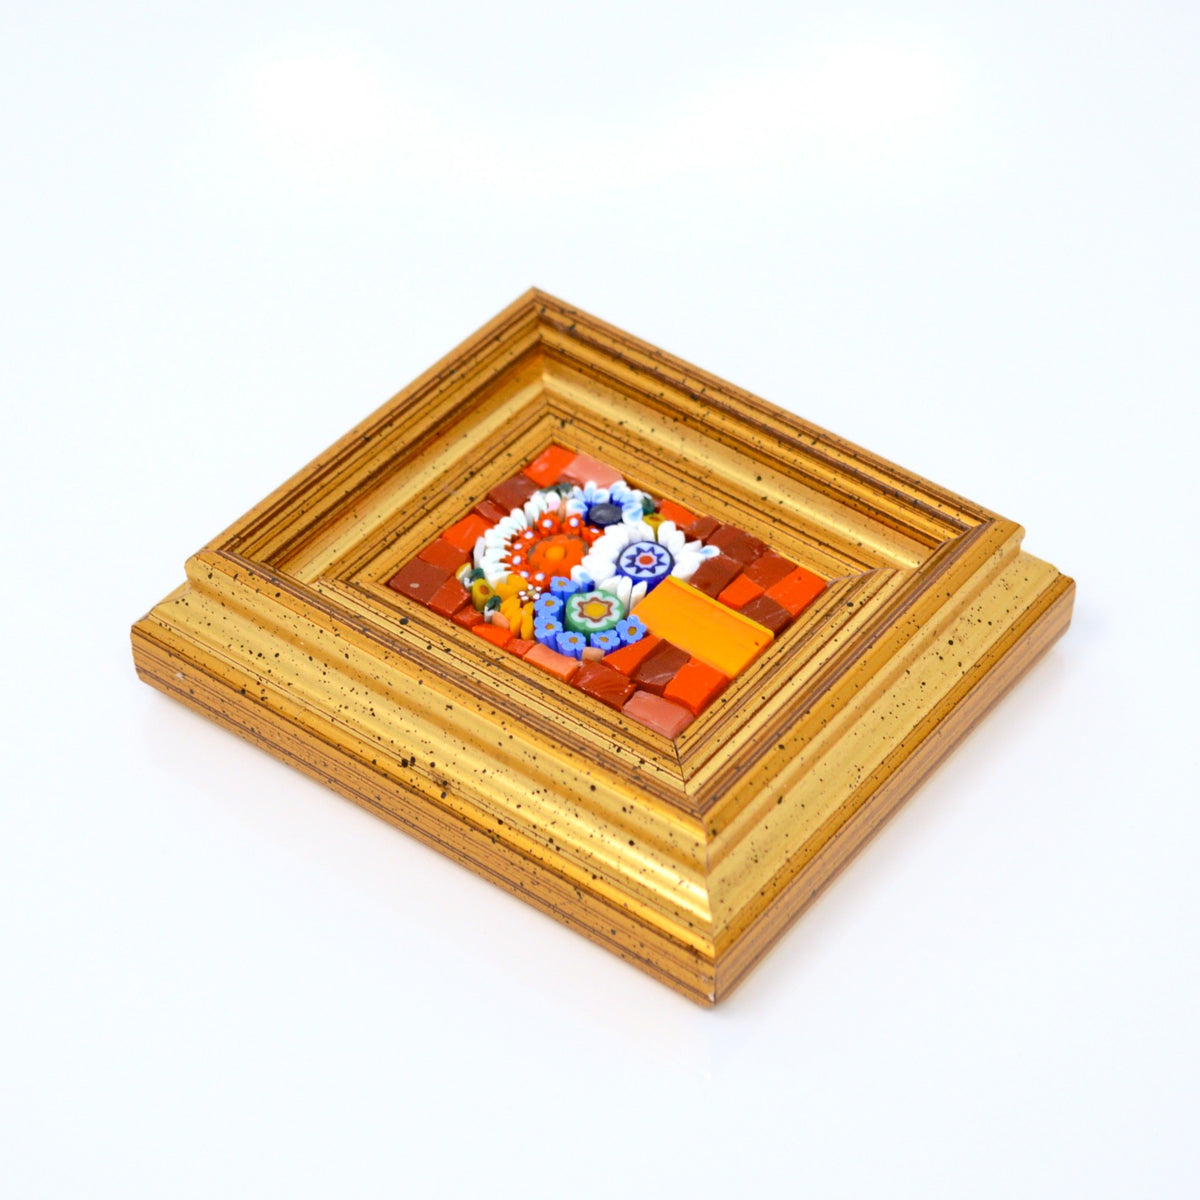 Miniature Framed Glass Floral Mosaic Art, Murano Glass, Red, Made in Italy - My Italian Decor